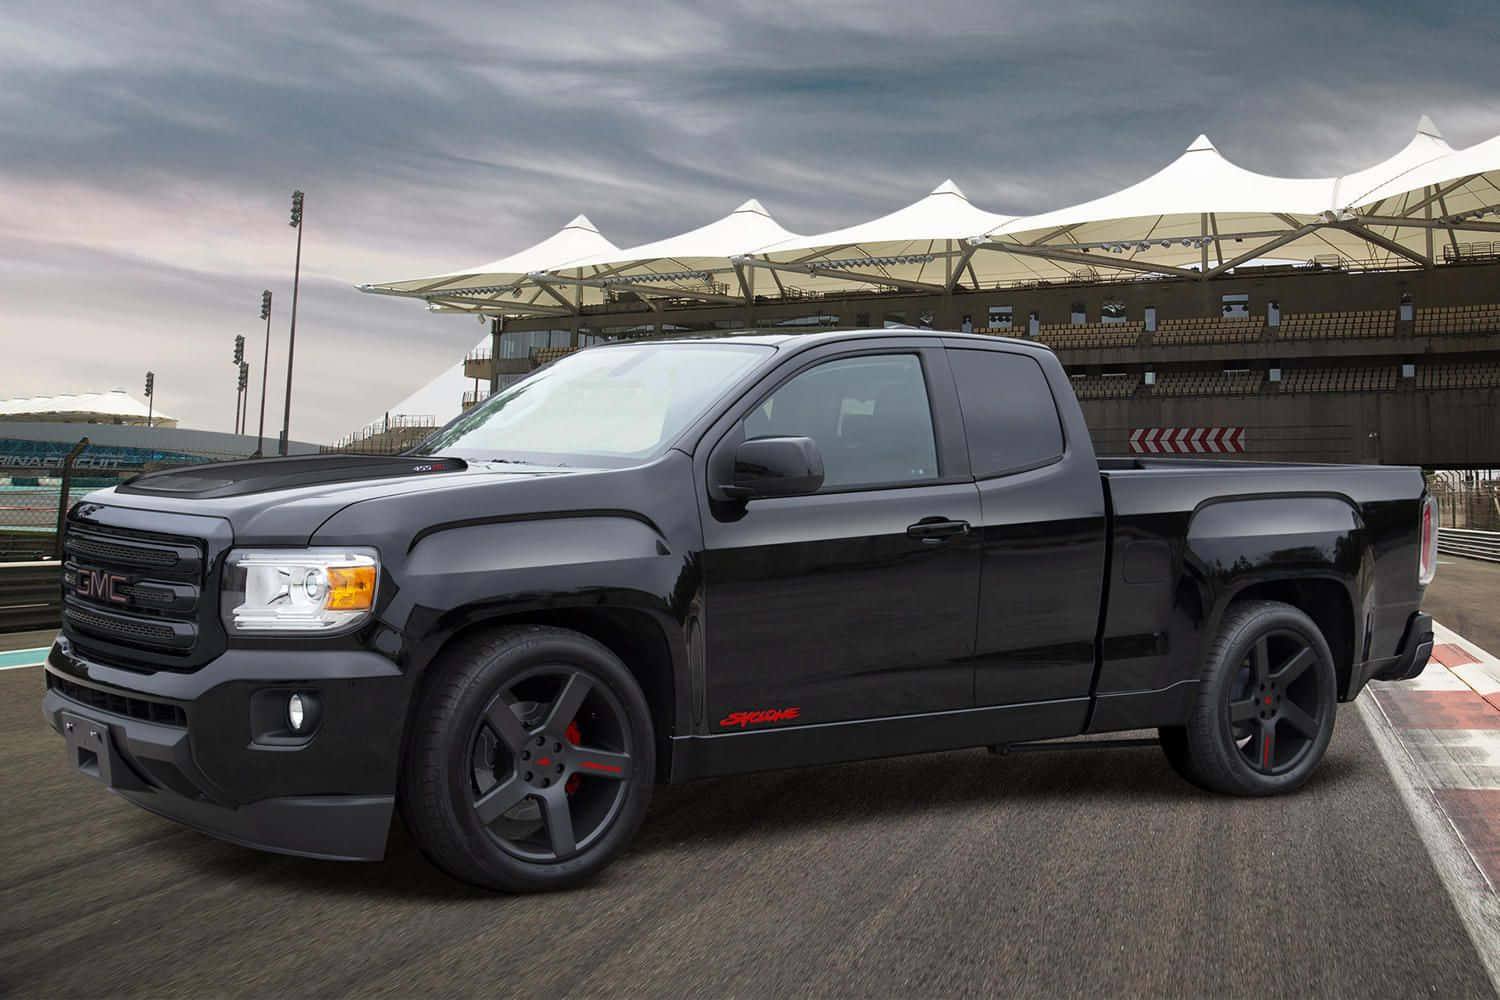 GMC Syclone: A Powerful Compact Truck Wallpaper